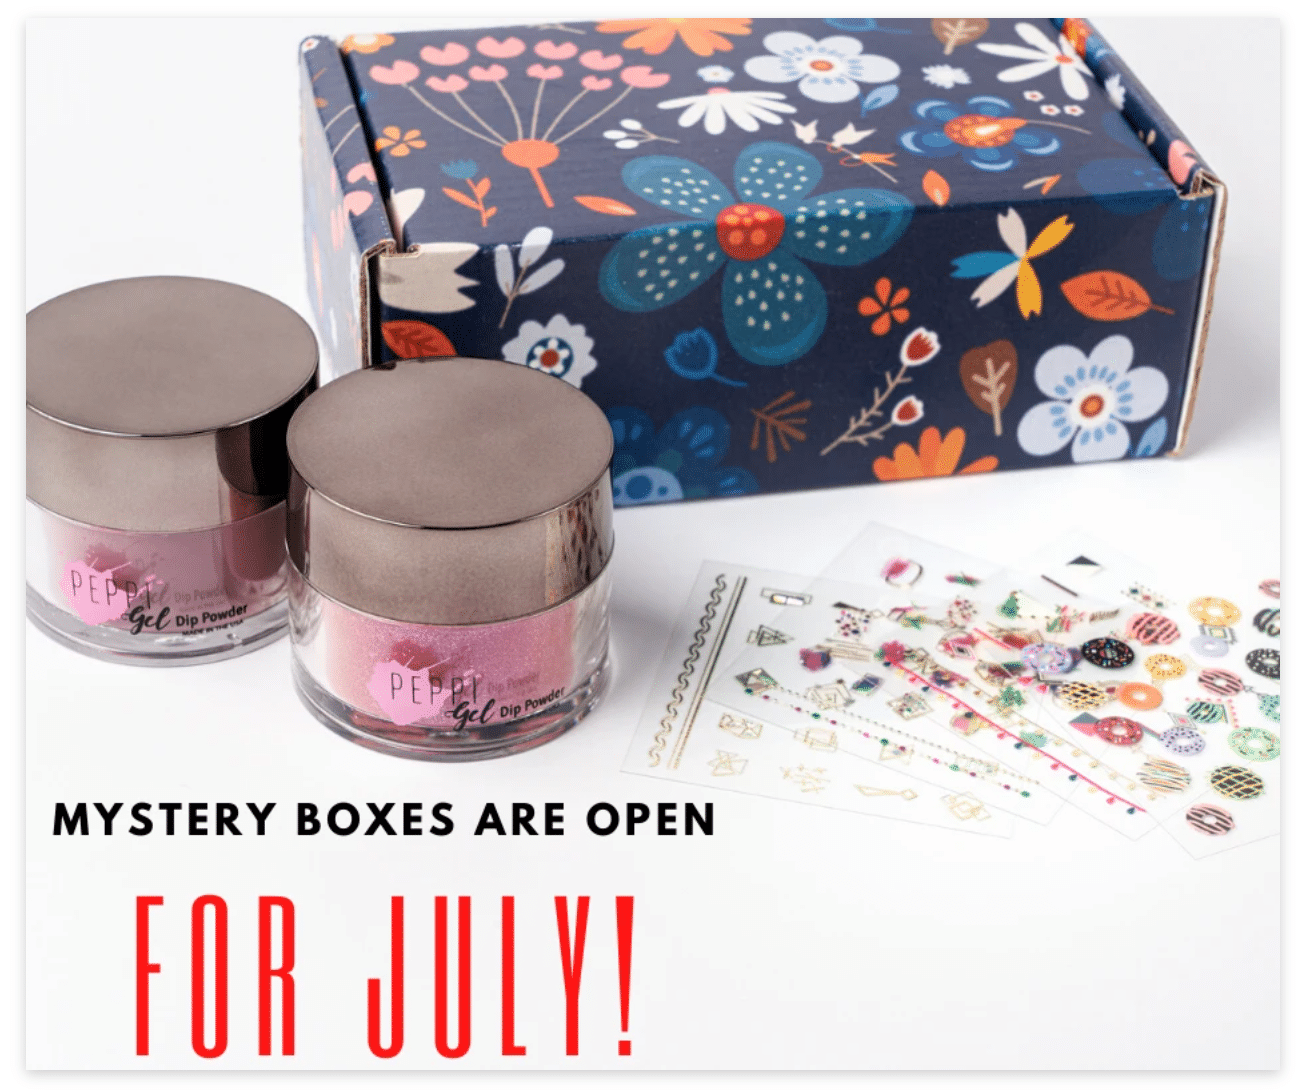 colorful mystery box with decorative paper and powder samples in little jars